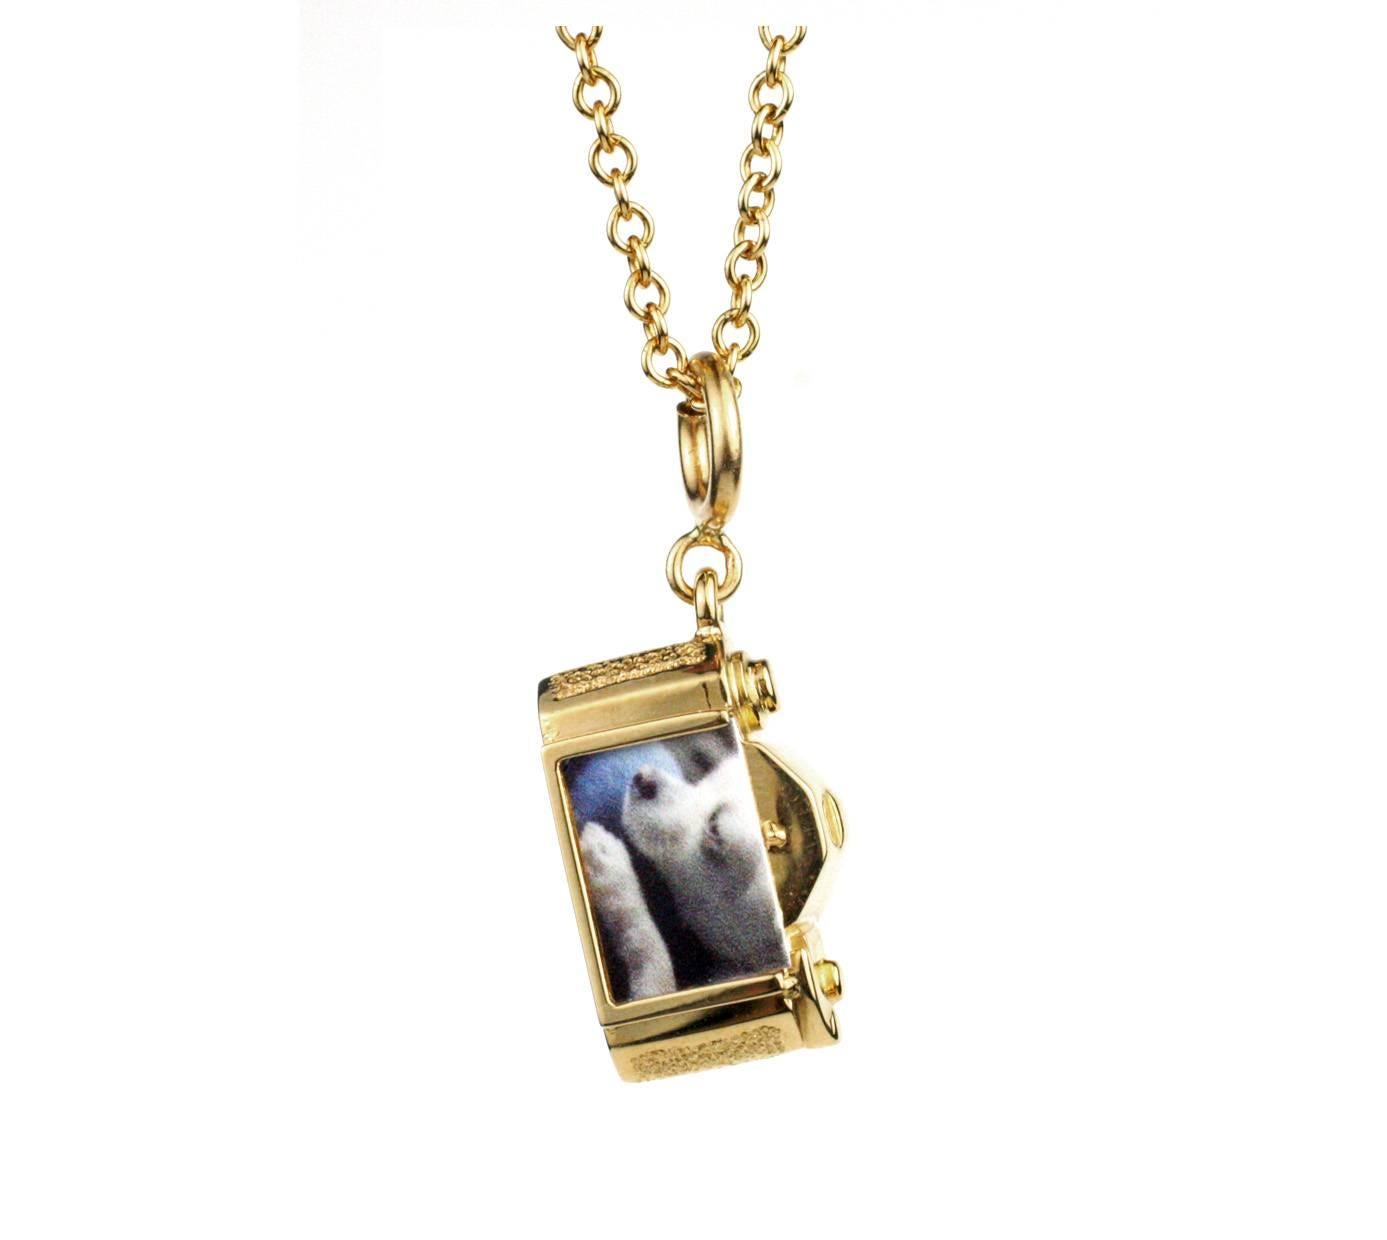 This beautifully made, solid 18 KT Gold Camera charm features a turning, adjustable focus and polished Platinum lens.  It also has an open, slide-in 3/4 frame to include a  special photo or message.  Price includes an 18KT Gold Neck Chain (18